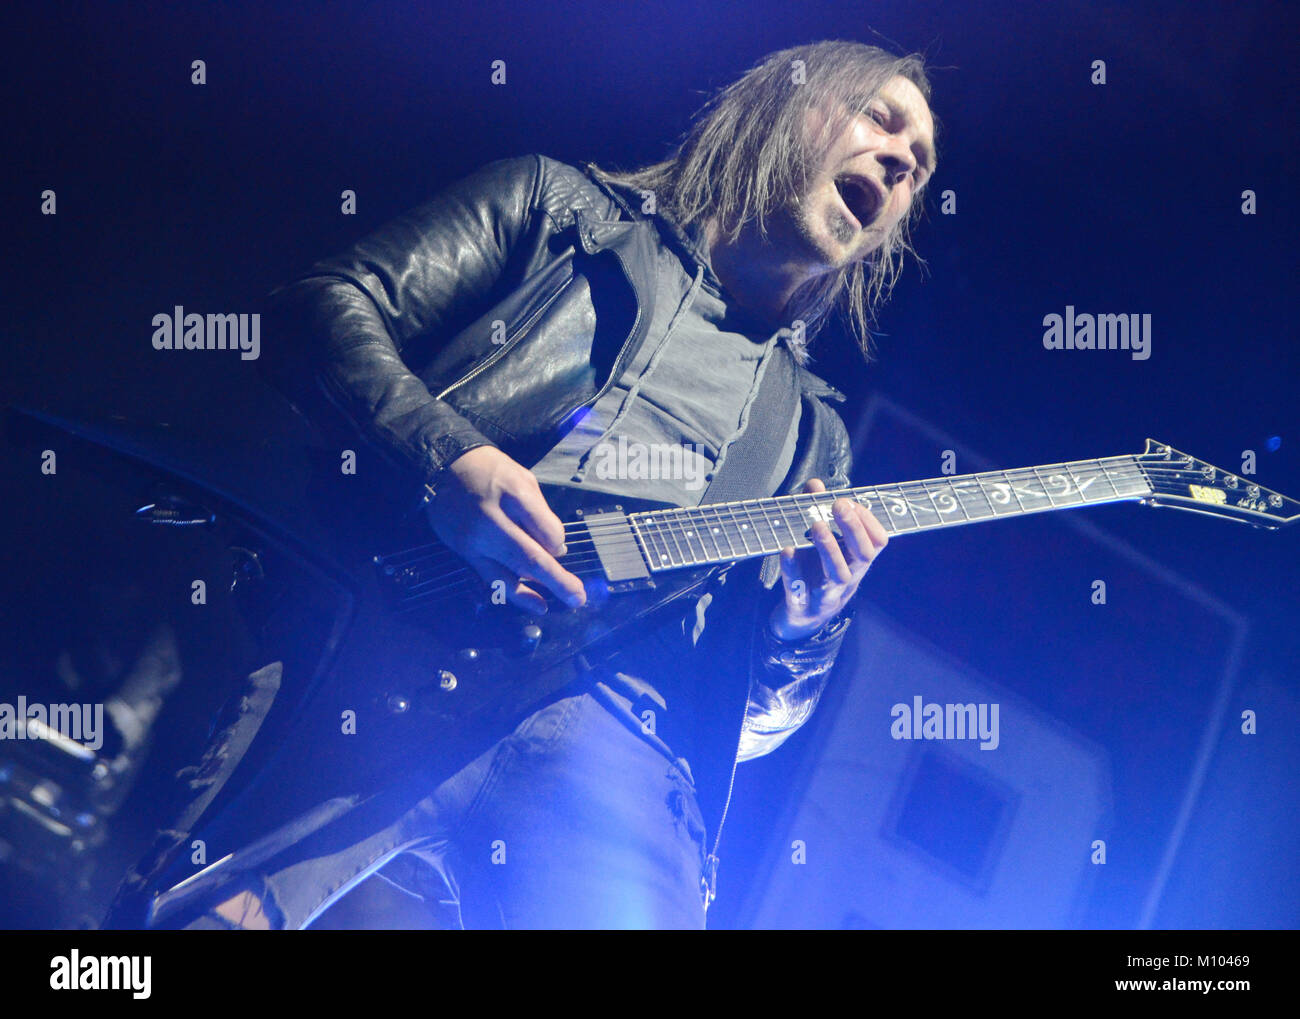 Green Bay, Wisconsin, USA. 24th Jan, 2018. Guitarist Michael Paget of the band Bullet For My Valentine performs at the Resch Center in Green Bay, Wisconsin. Ricky Bassman/CSM/Alamy Live News Stock Photo